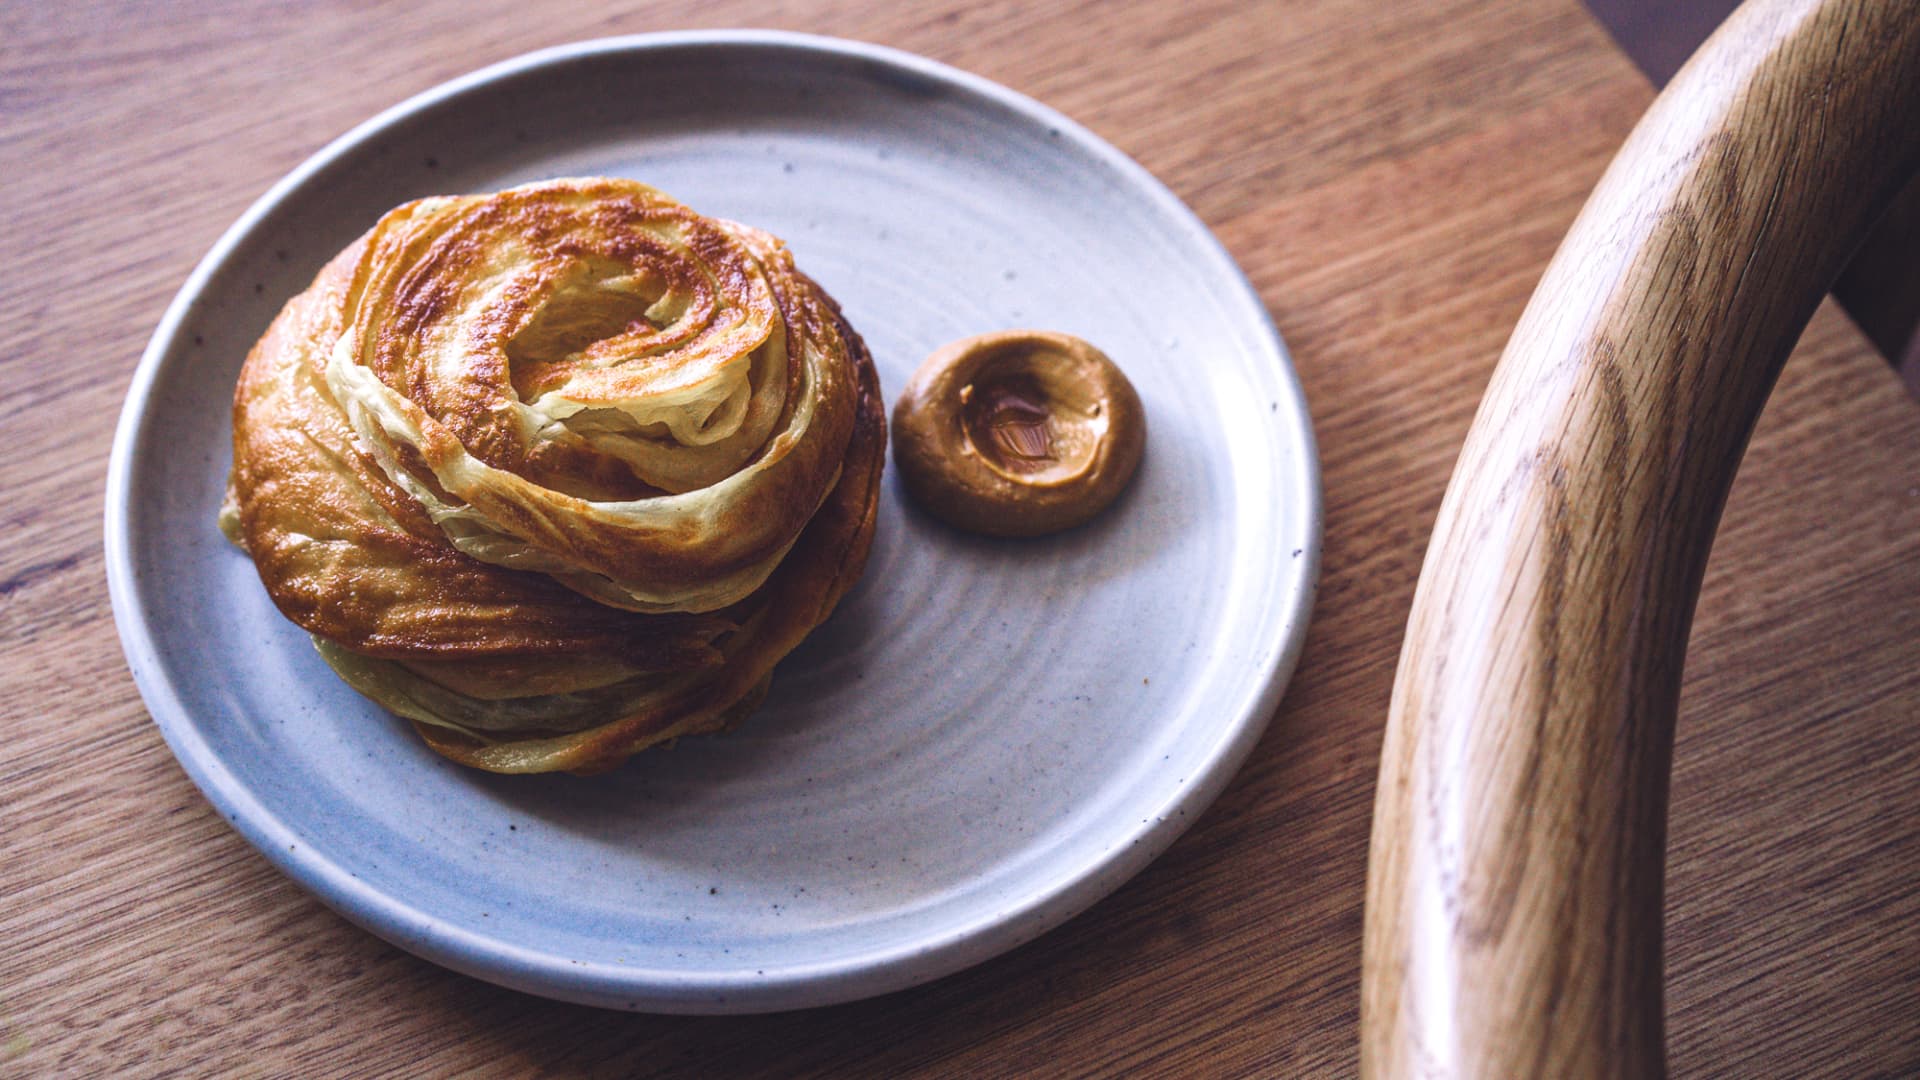 Sunda's buttery roti is served alongside a paste-like 'curry' laced with Vegemite.